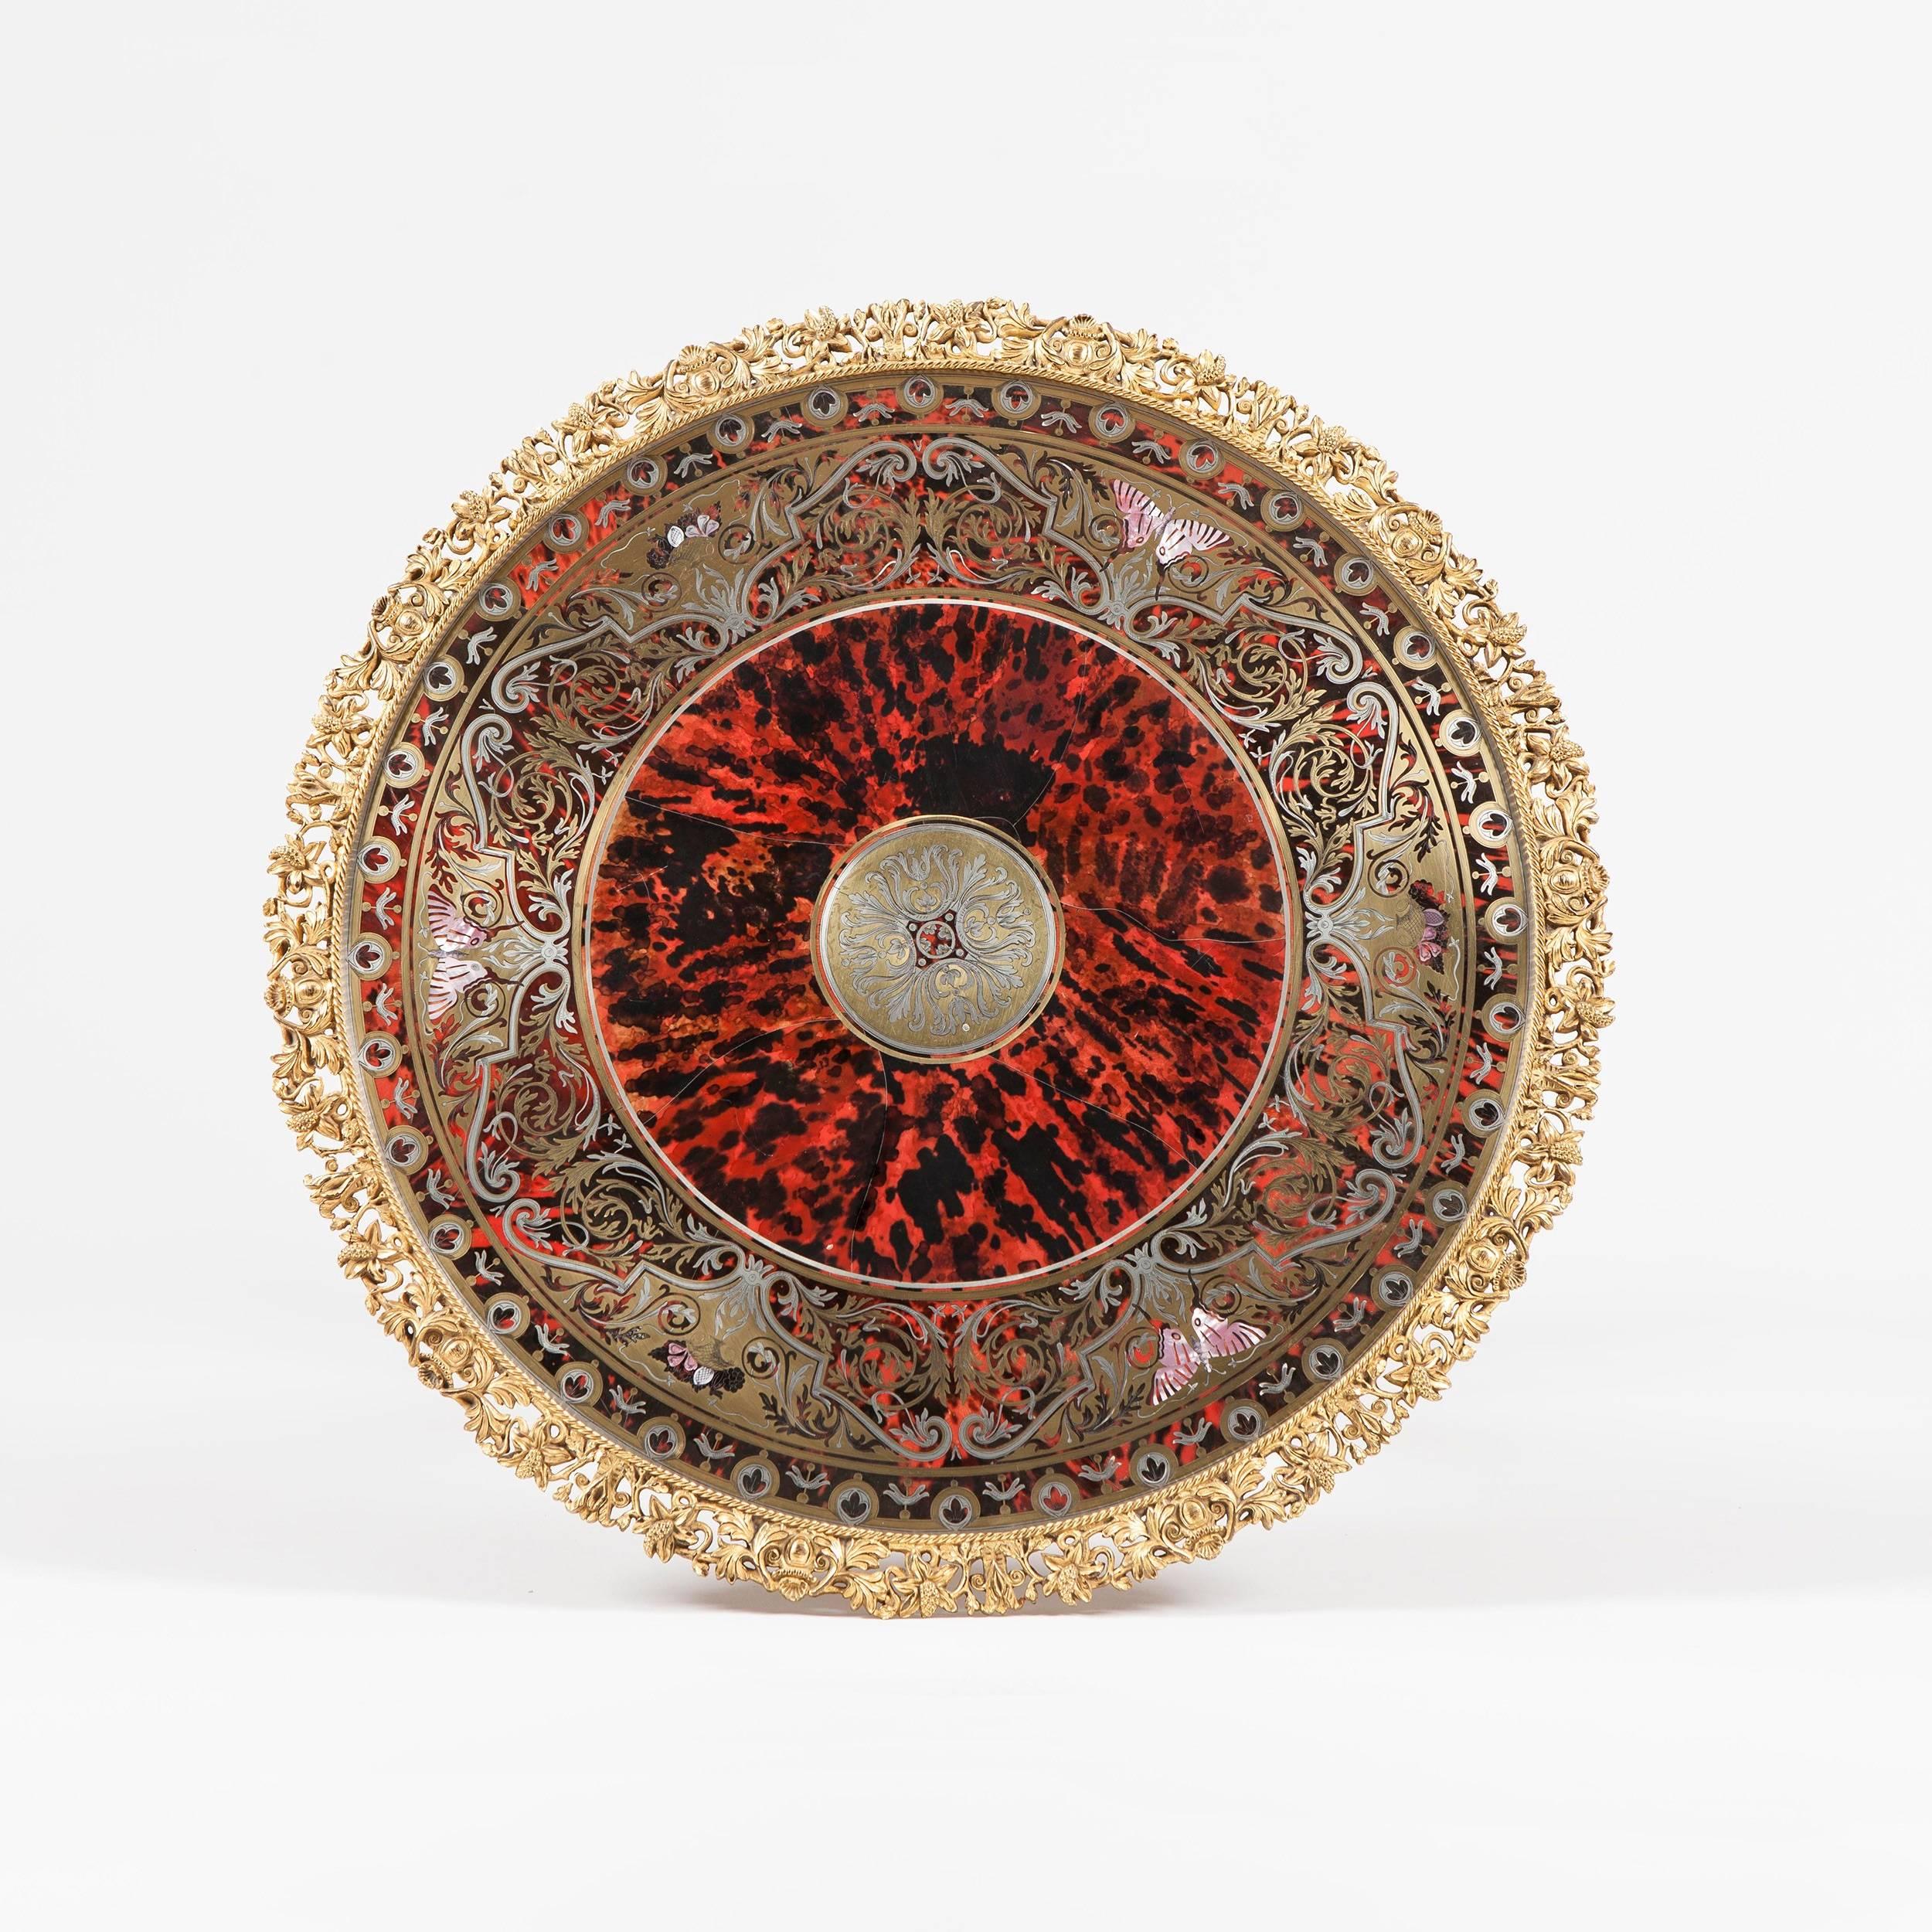 The whole of red tortoiseshell inlaid with silver pewter and gold brass marquetry or premier-parte mounted with finely cast gold gilt bronze mounts, the circular top decorated with designs of arabesques, foliage and butterflies of mother-of-pearl,